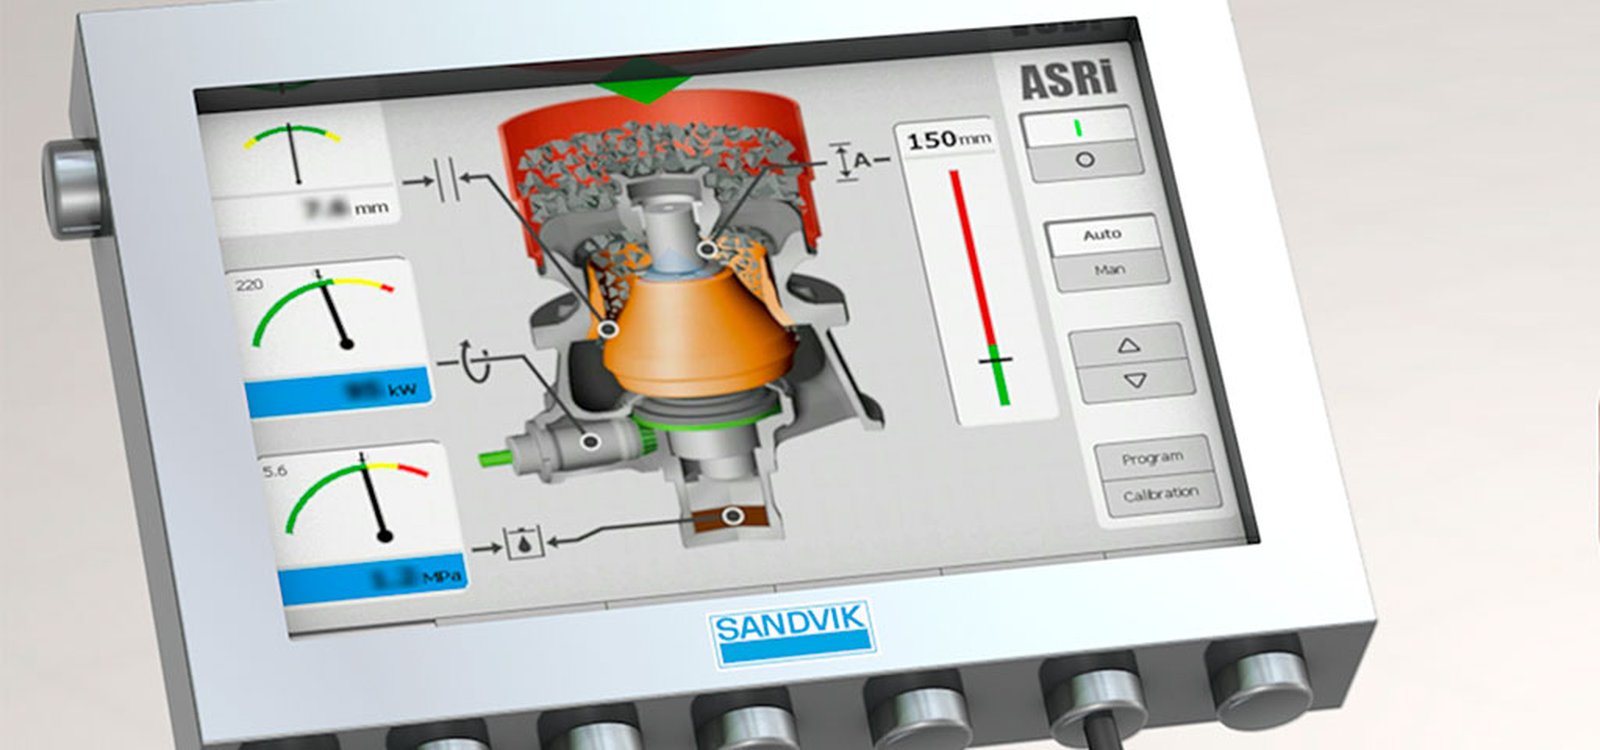 ASRiTM, which can be integrated into the mine’s main control room, automatically controls the crusher in real time to match feed curve variations and variations in material hardness.